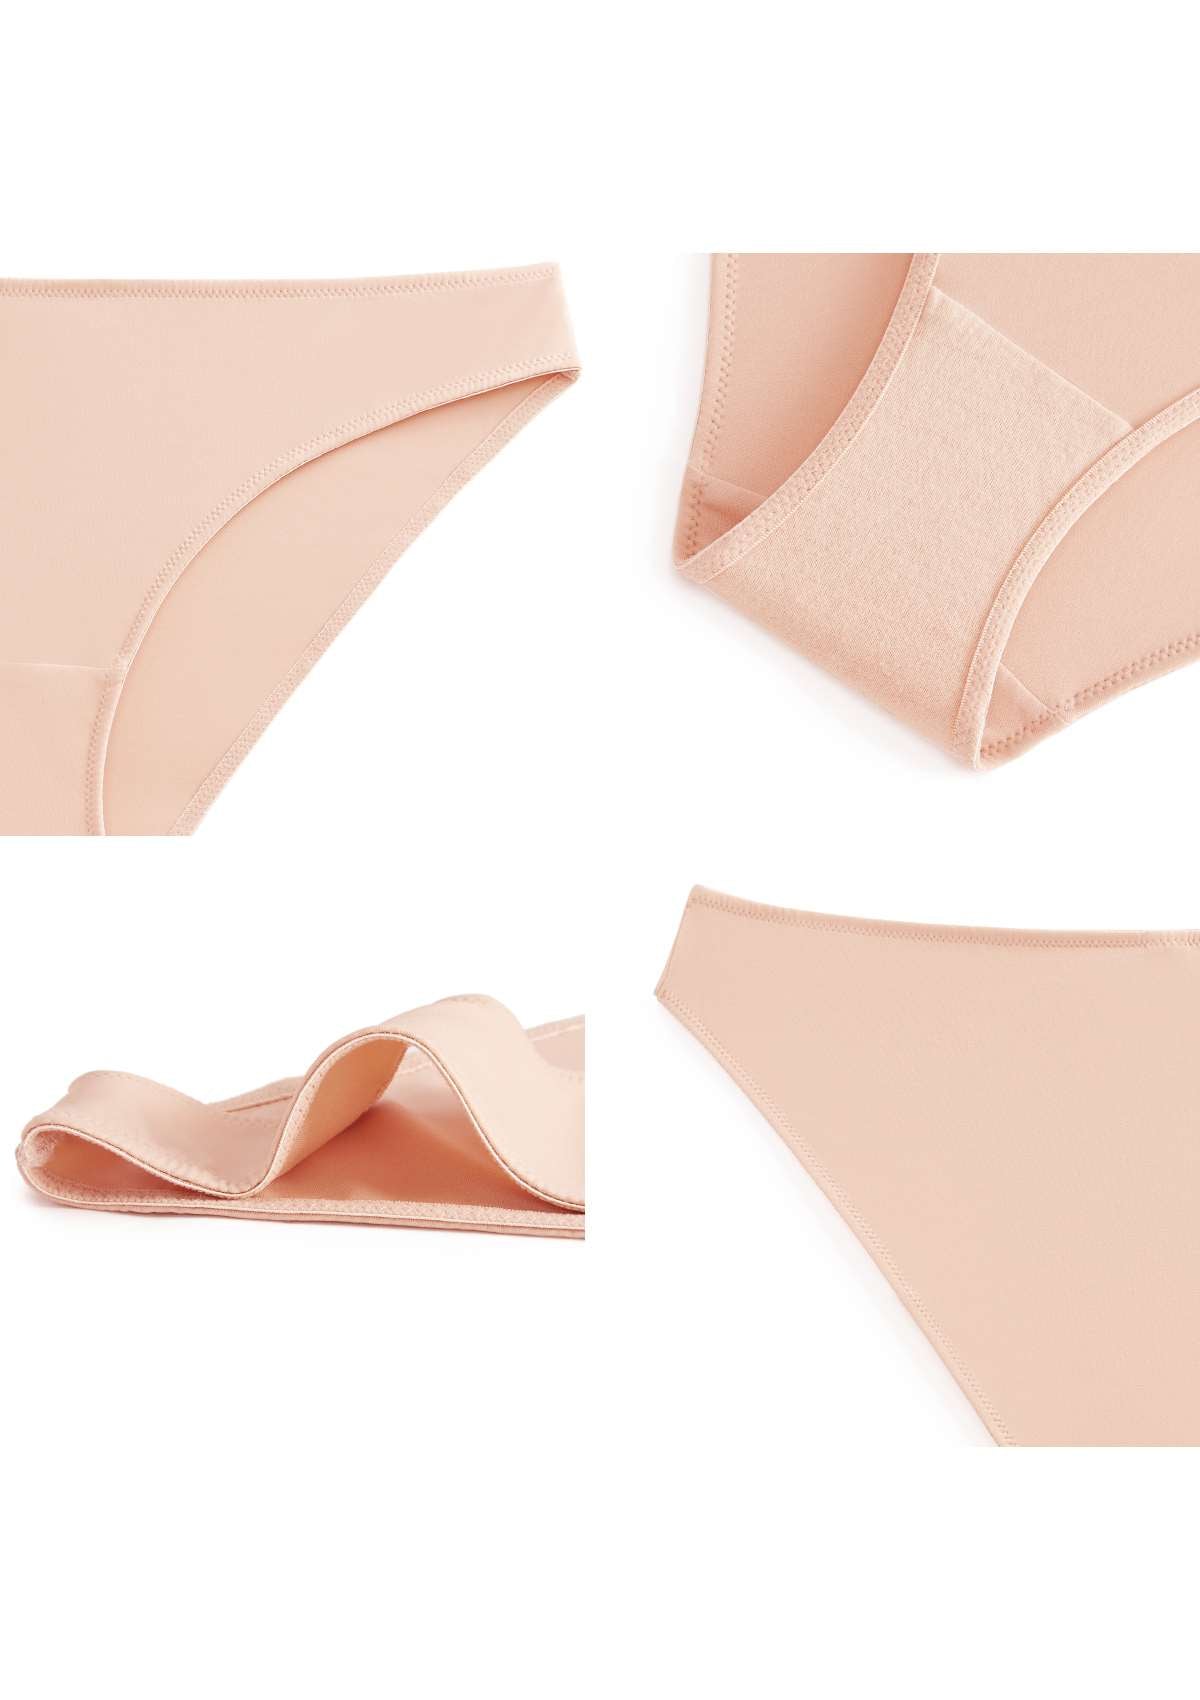 HSIA Patricia Smooth Classic Soft Stretch Panty - Everyday Comfort - L / Light Pink